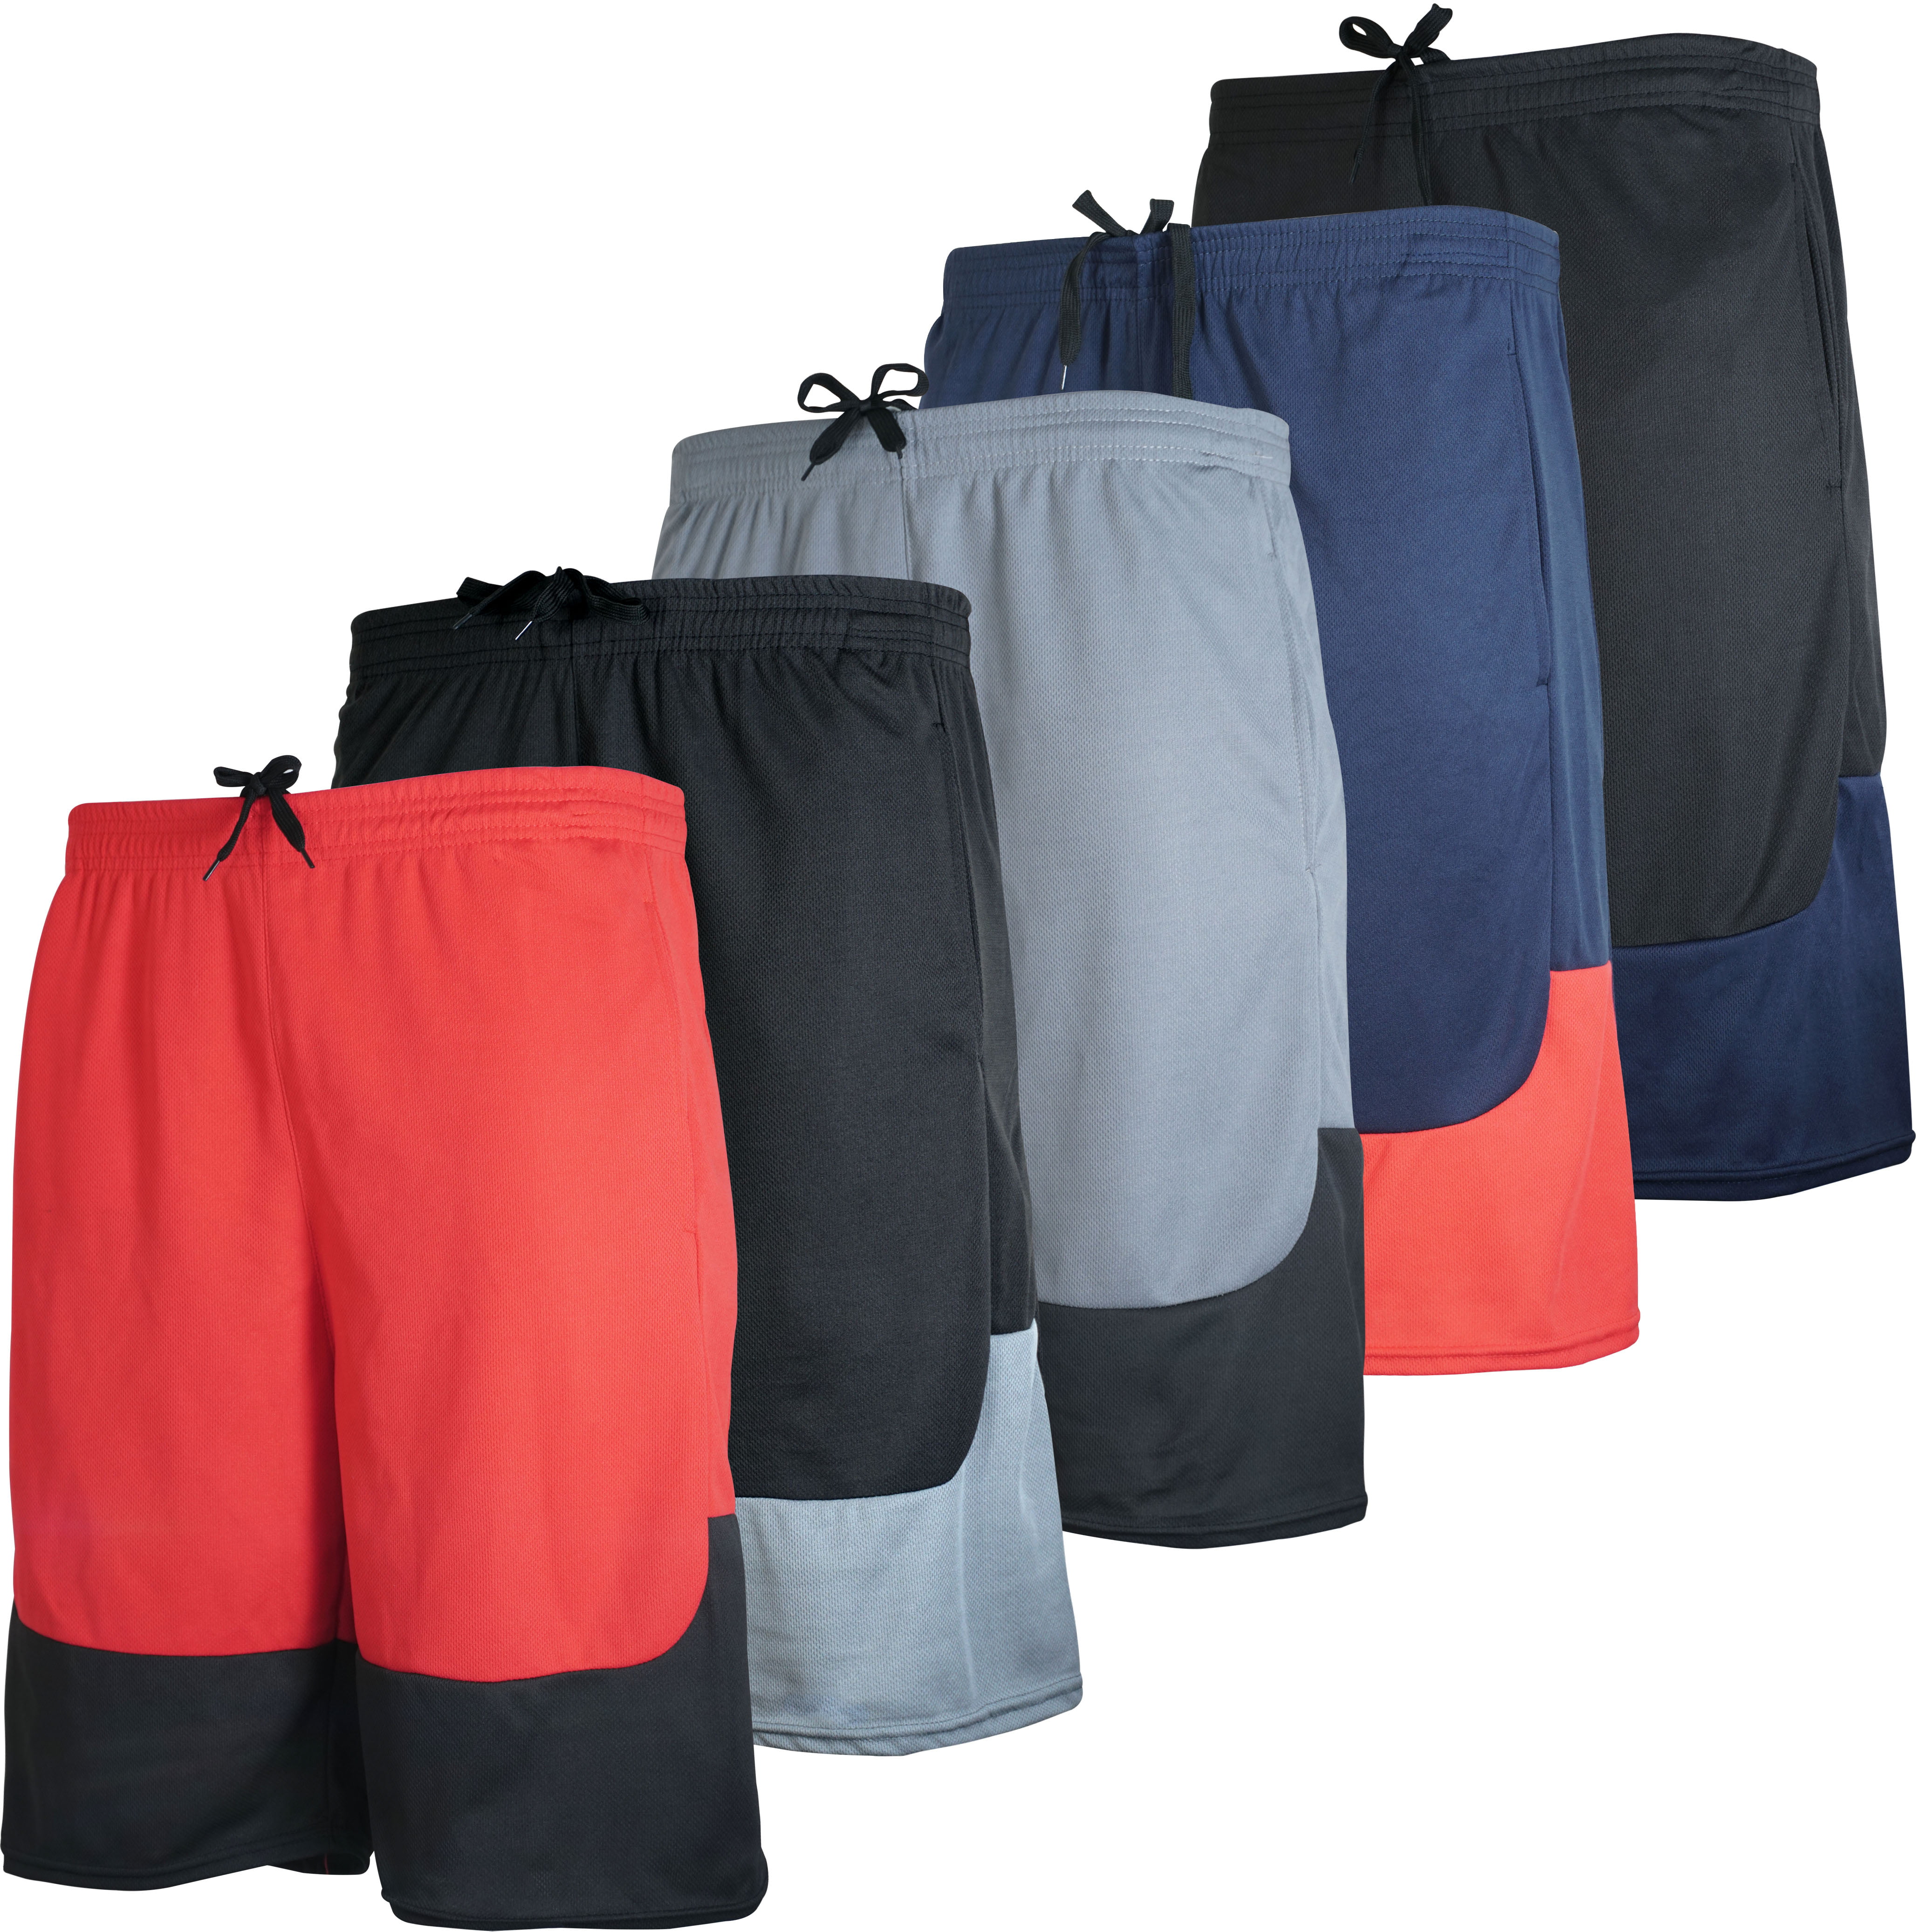 Real Essentials - 5 Pack Men's Mesh Active Athletic Performance Shorts ...